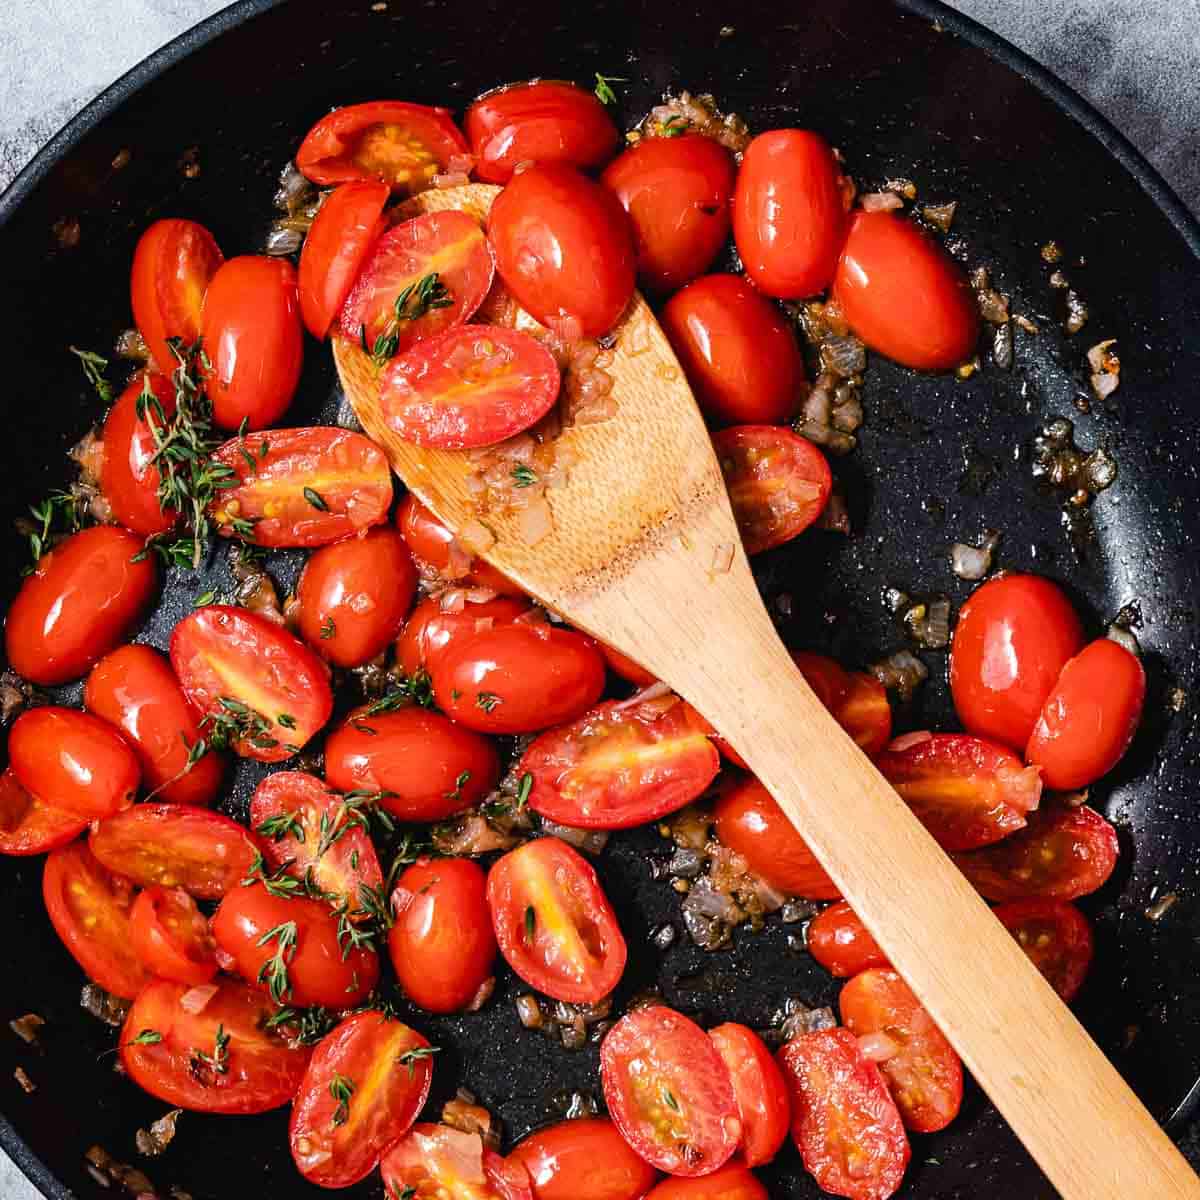 tomatoes and shallots in a black skillet.